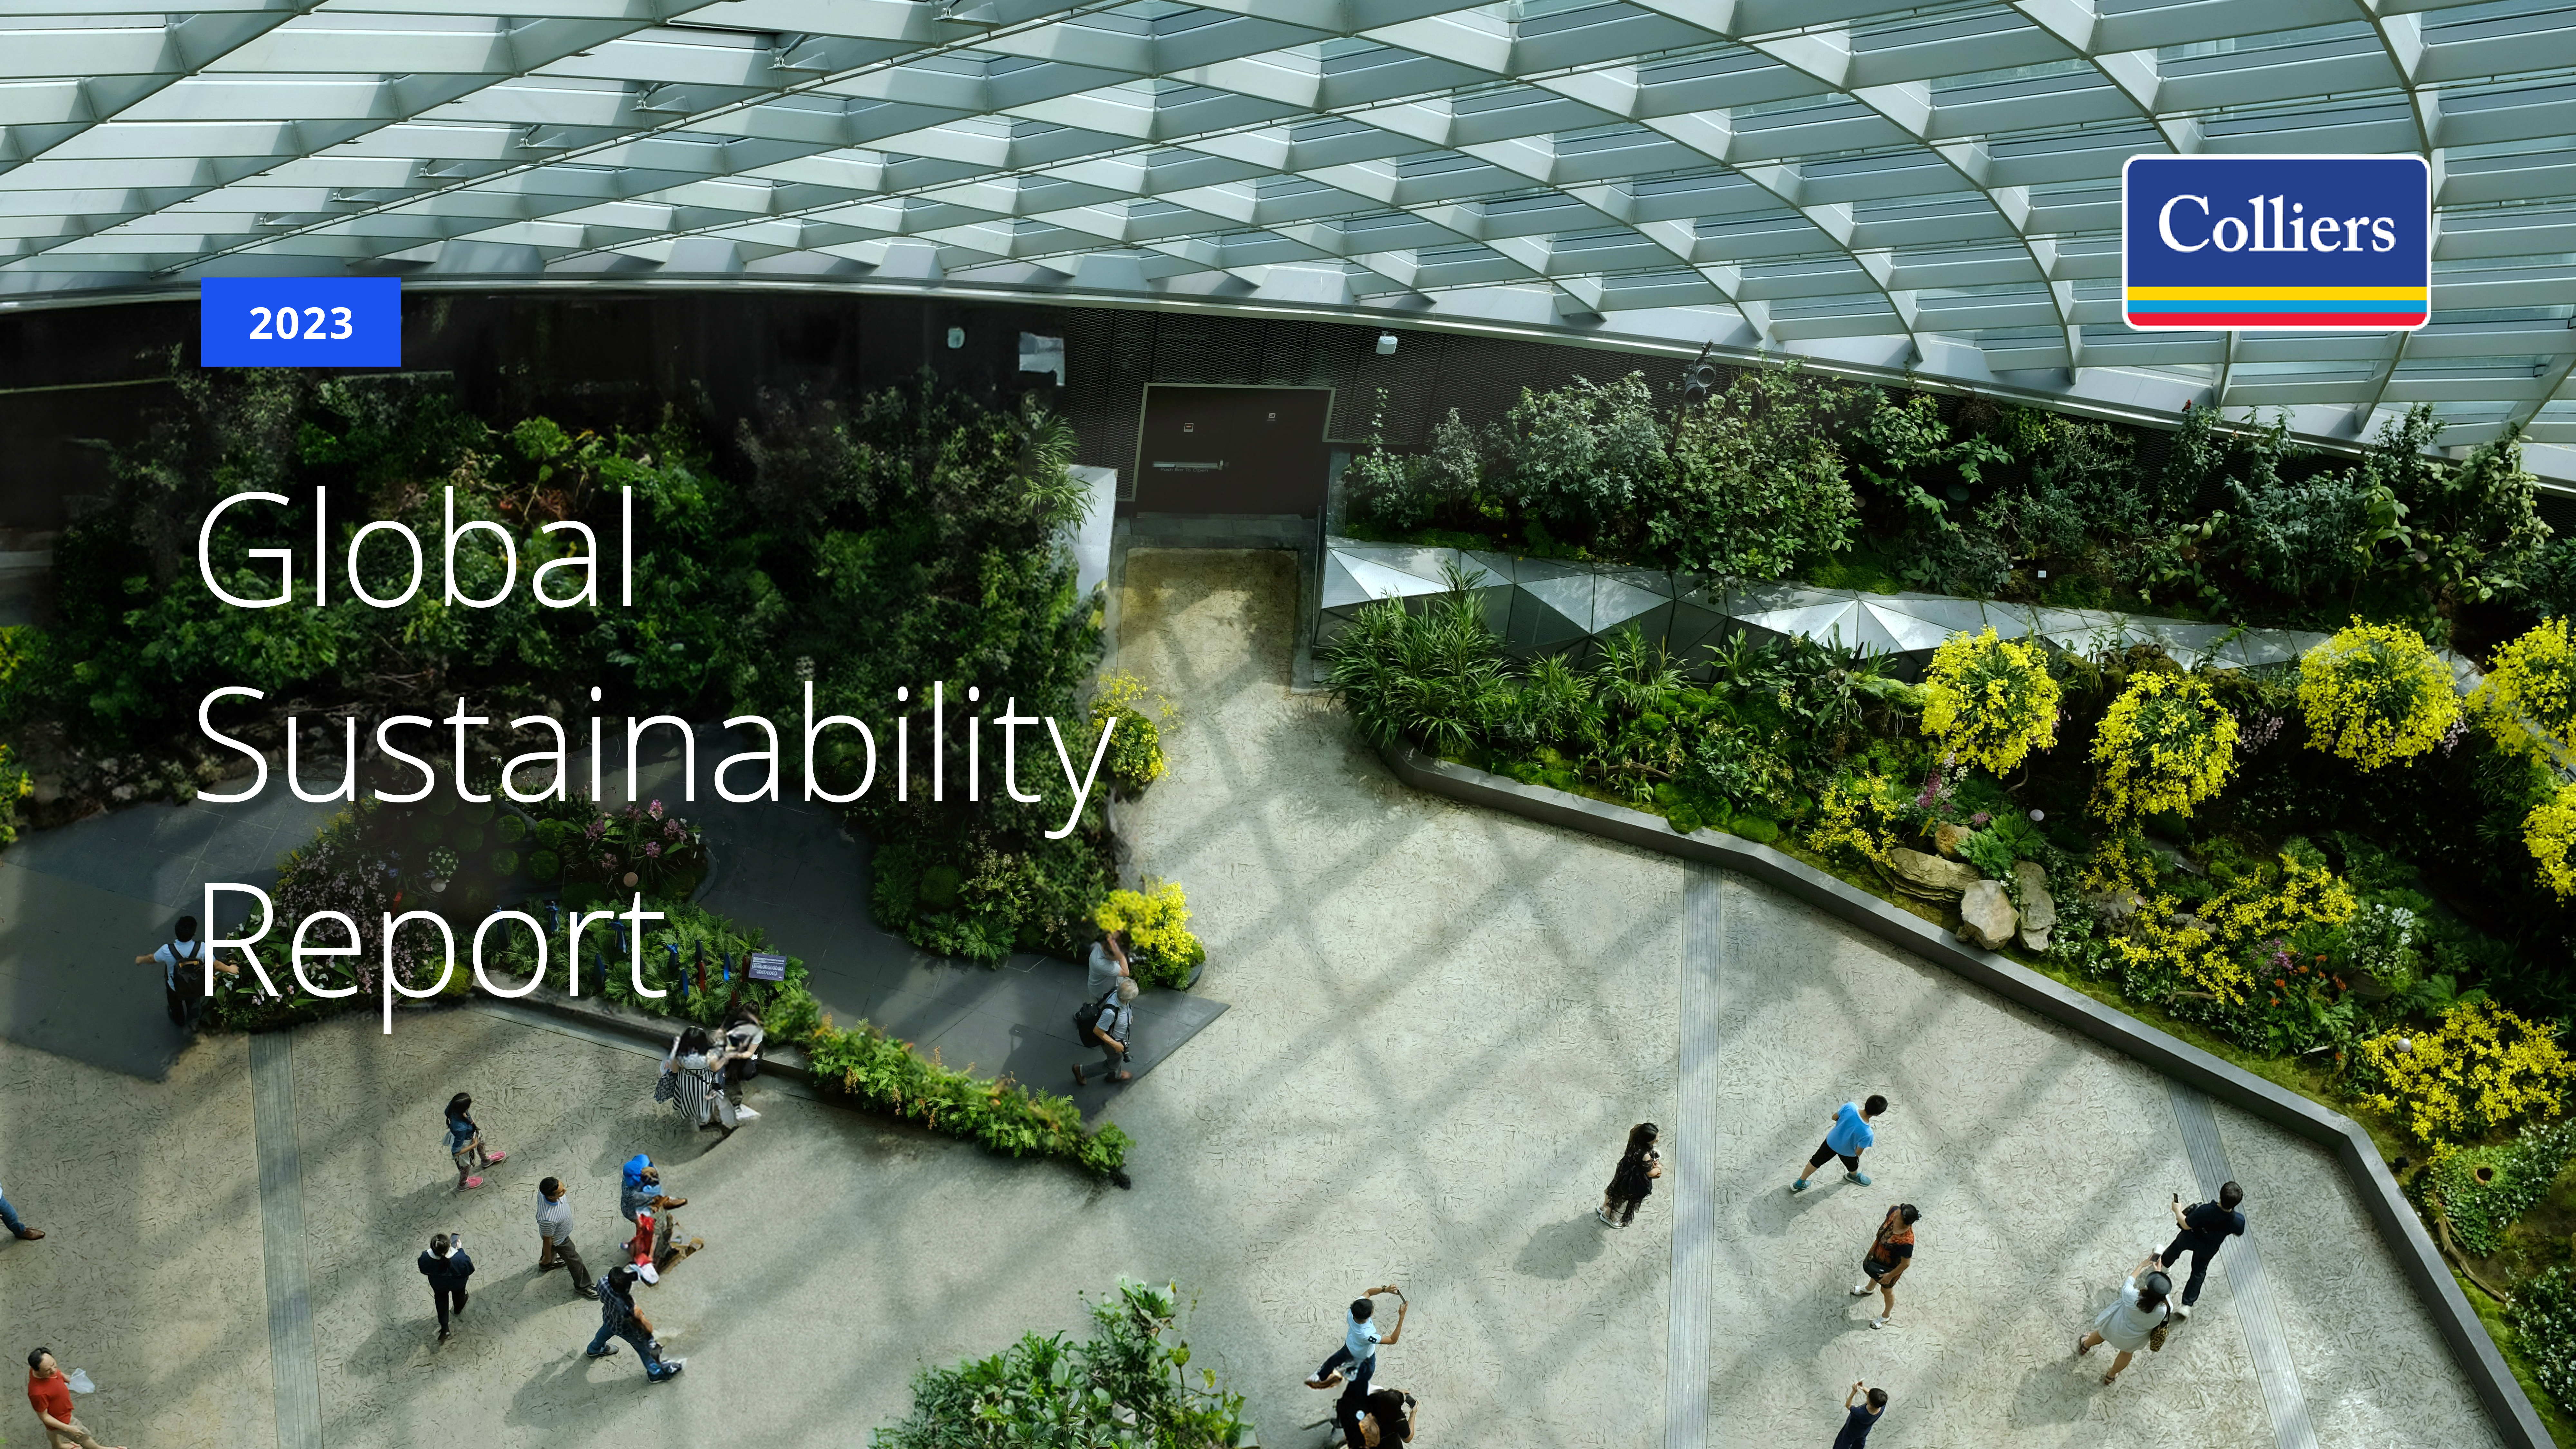 Colliers 2023 Global Sustainability Report